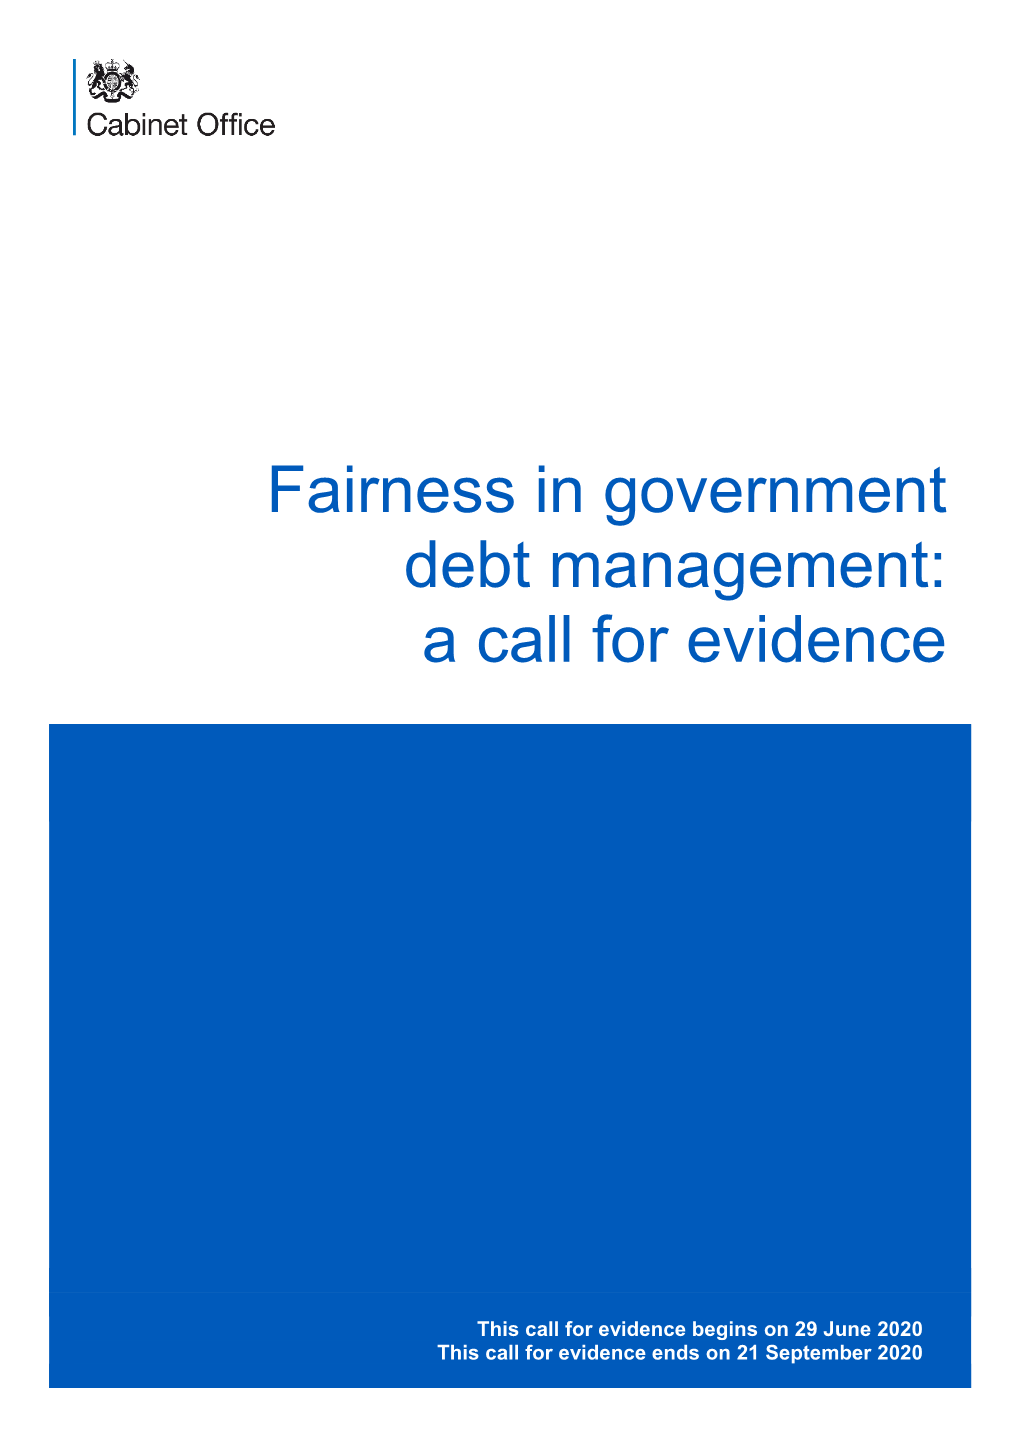 Fairness in Government Debt Management: a Call for Evidence